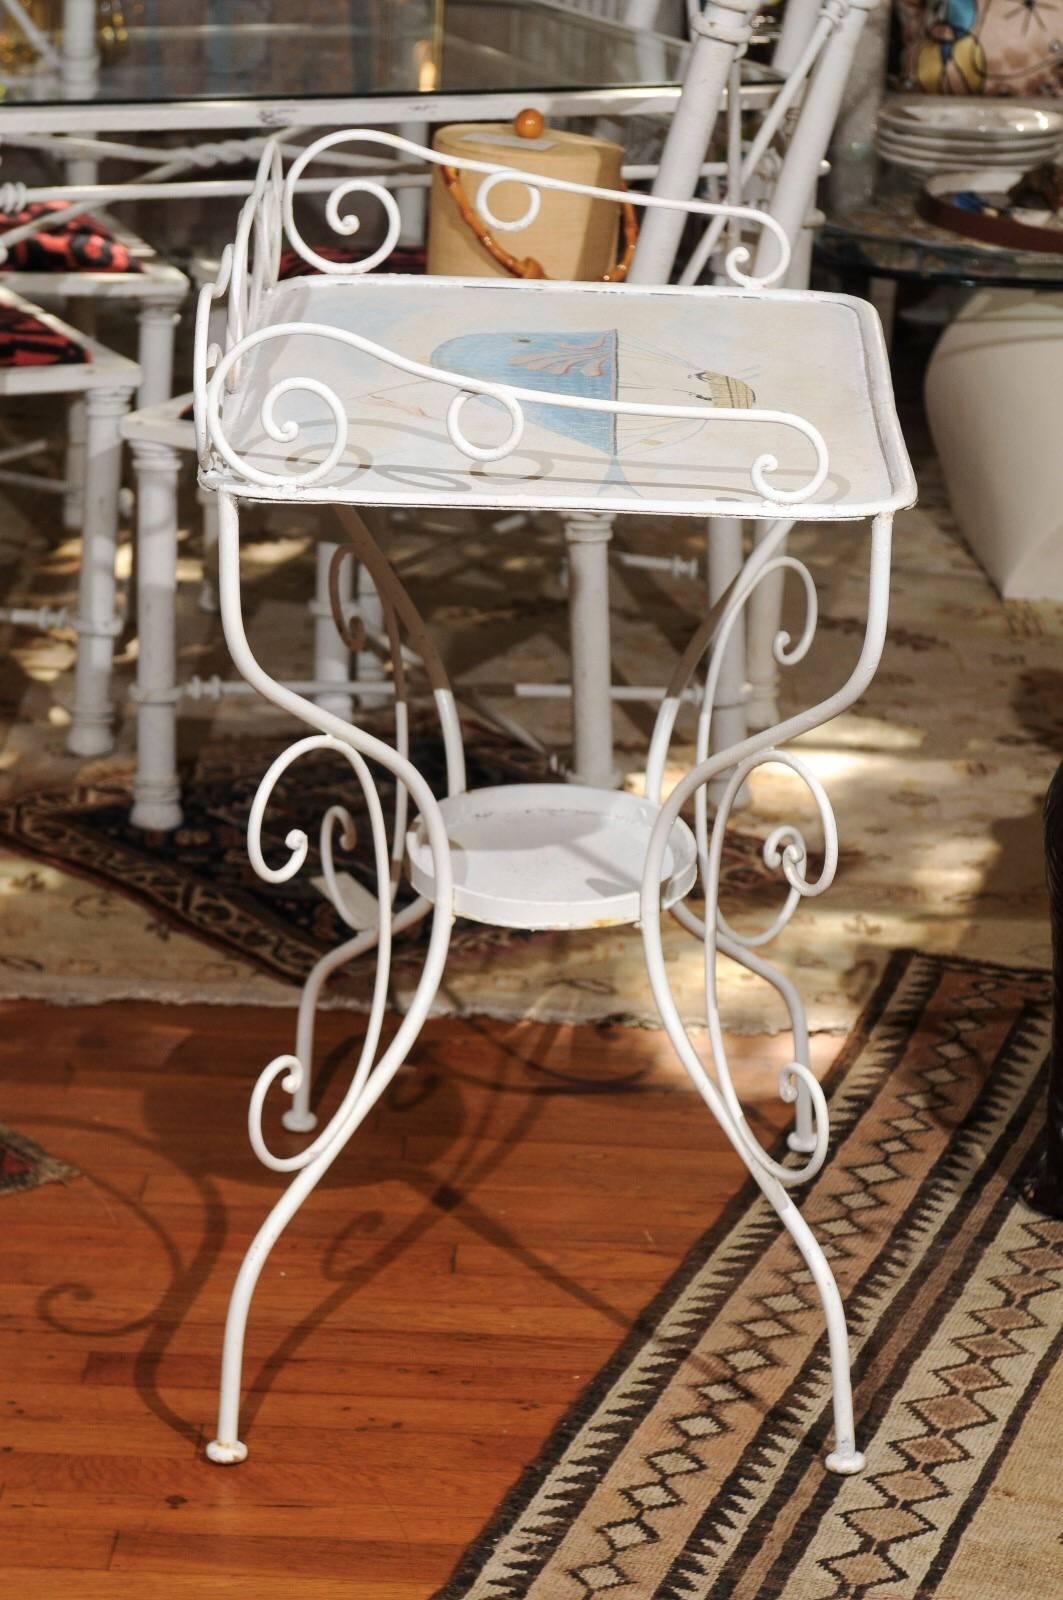 Late 19th Century French wrought iron garden table painted in white with a charming Victorian era steampunk illustration of a whale shaped hot air balloon carrying three sailors in a suspended boat.  